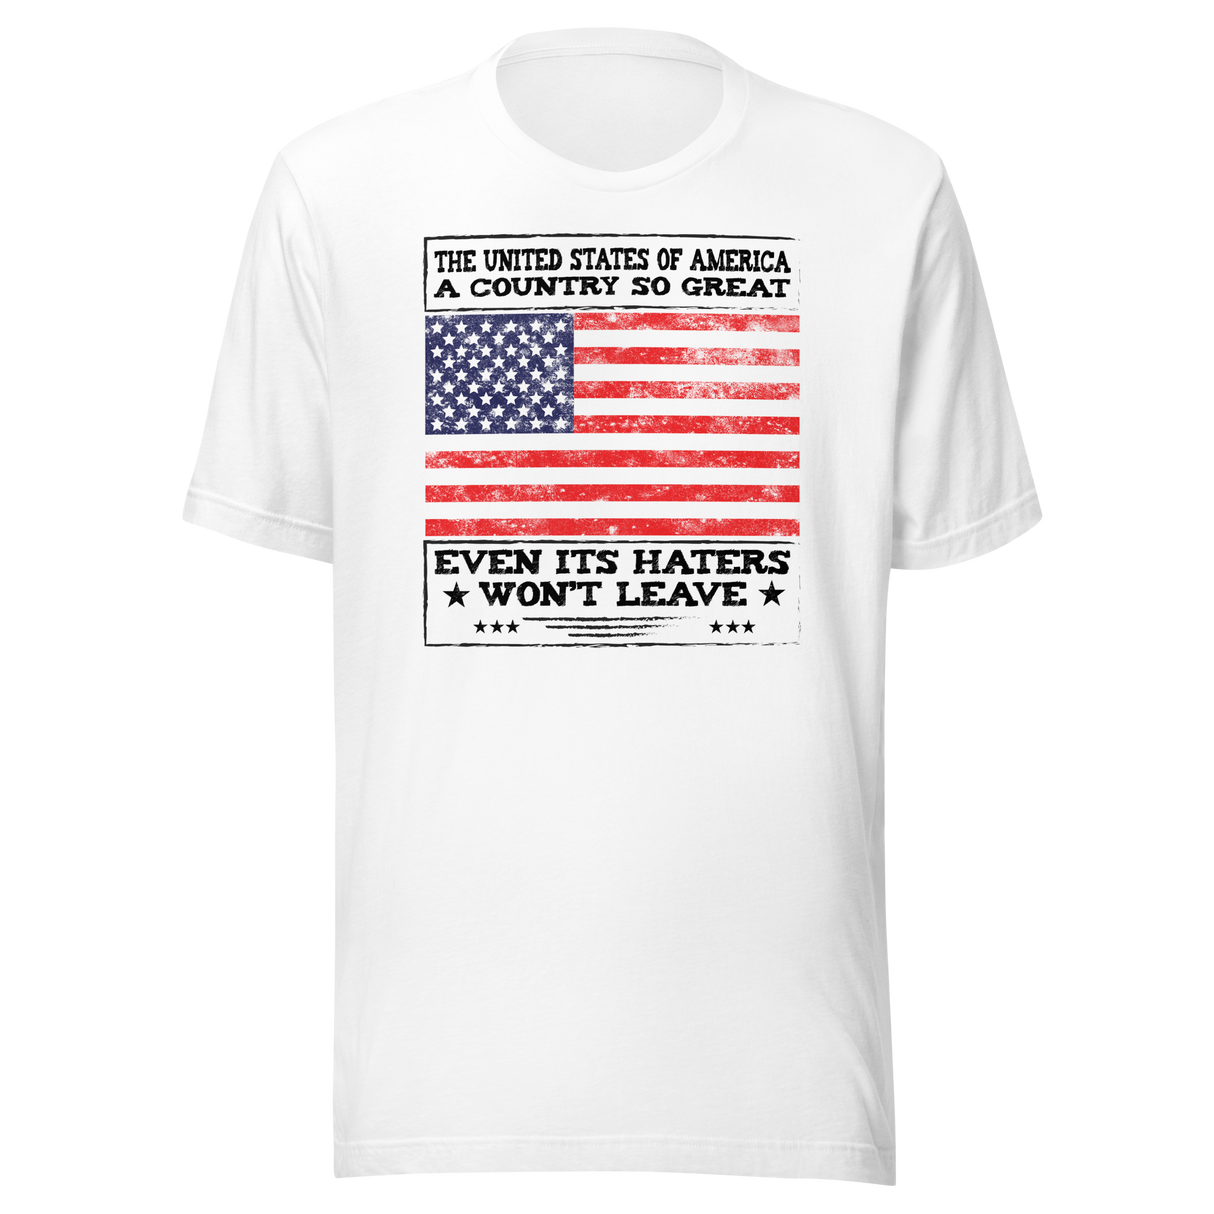 the-united-states-of-america-a-country-so-great-even-its-haters-wont-leave-politics-tee-politics-t-shirt-united-states-tee-patriotism-t-shirt-humor-tee#color_white